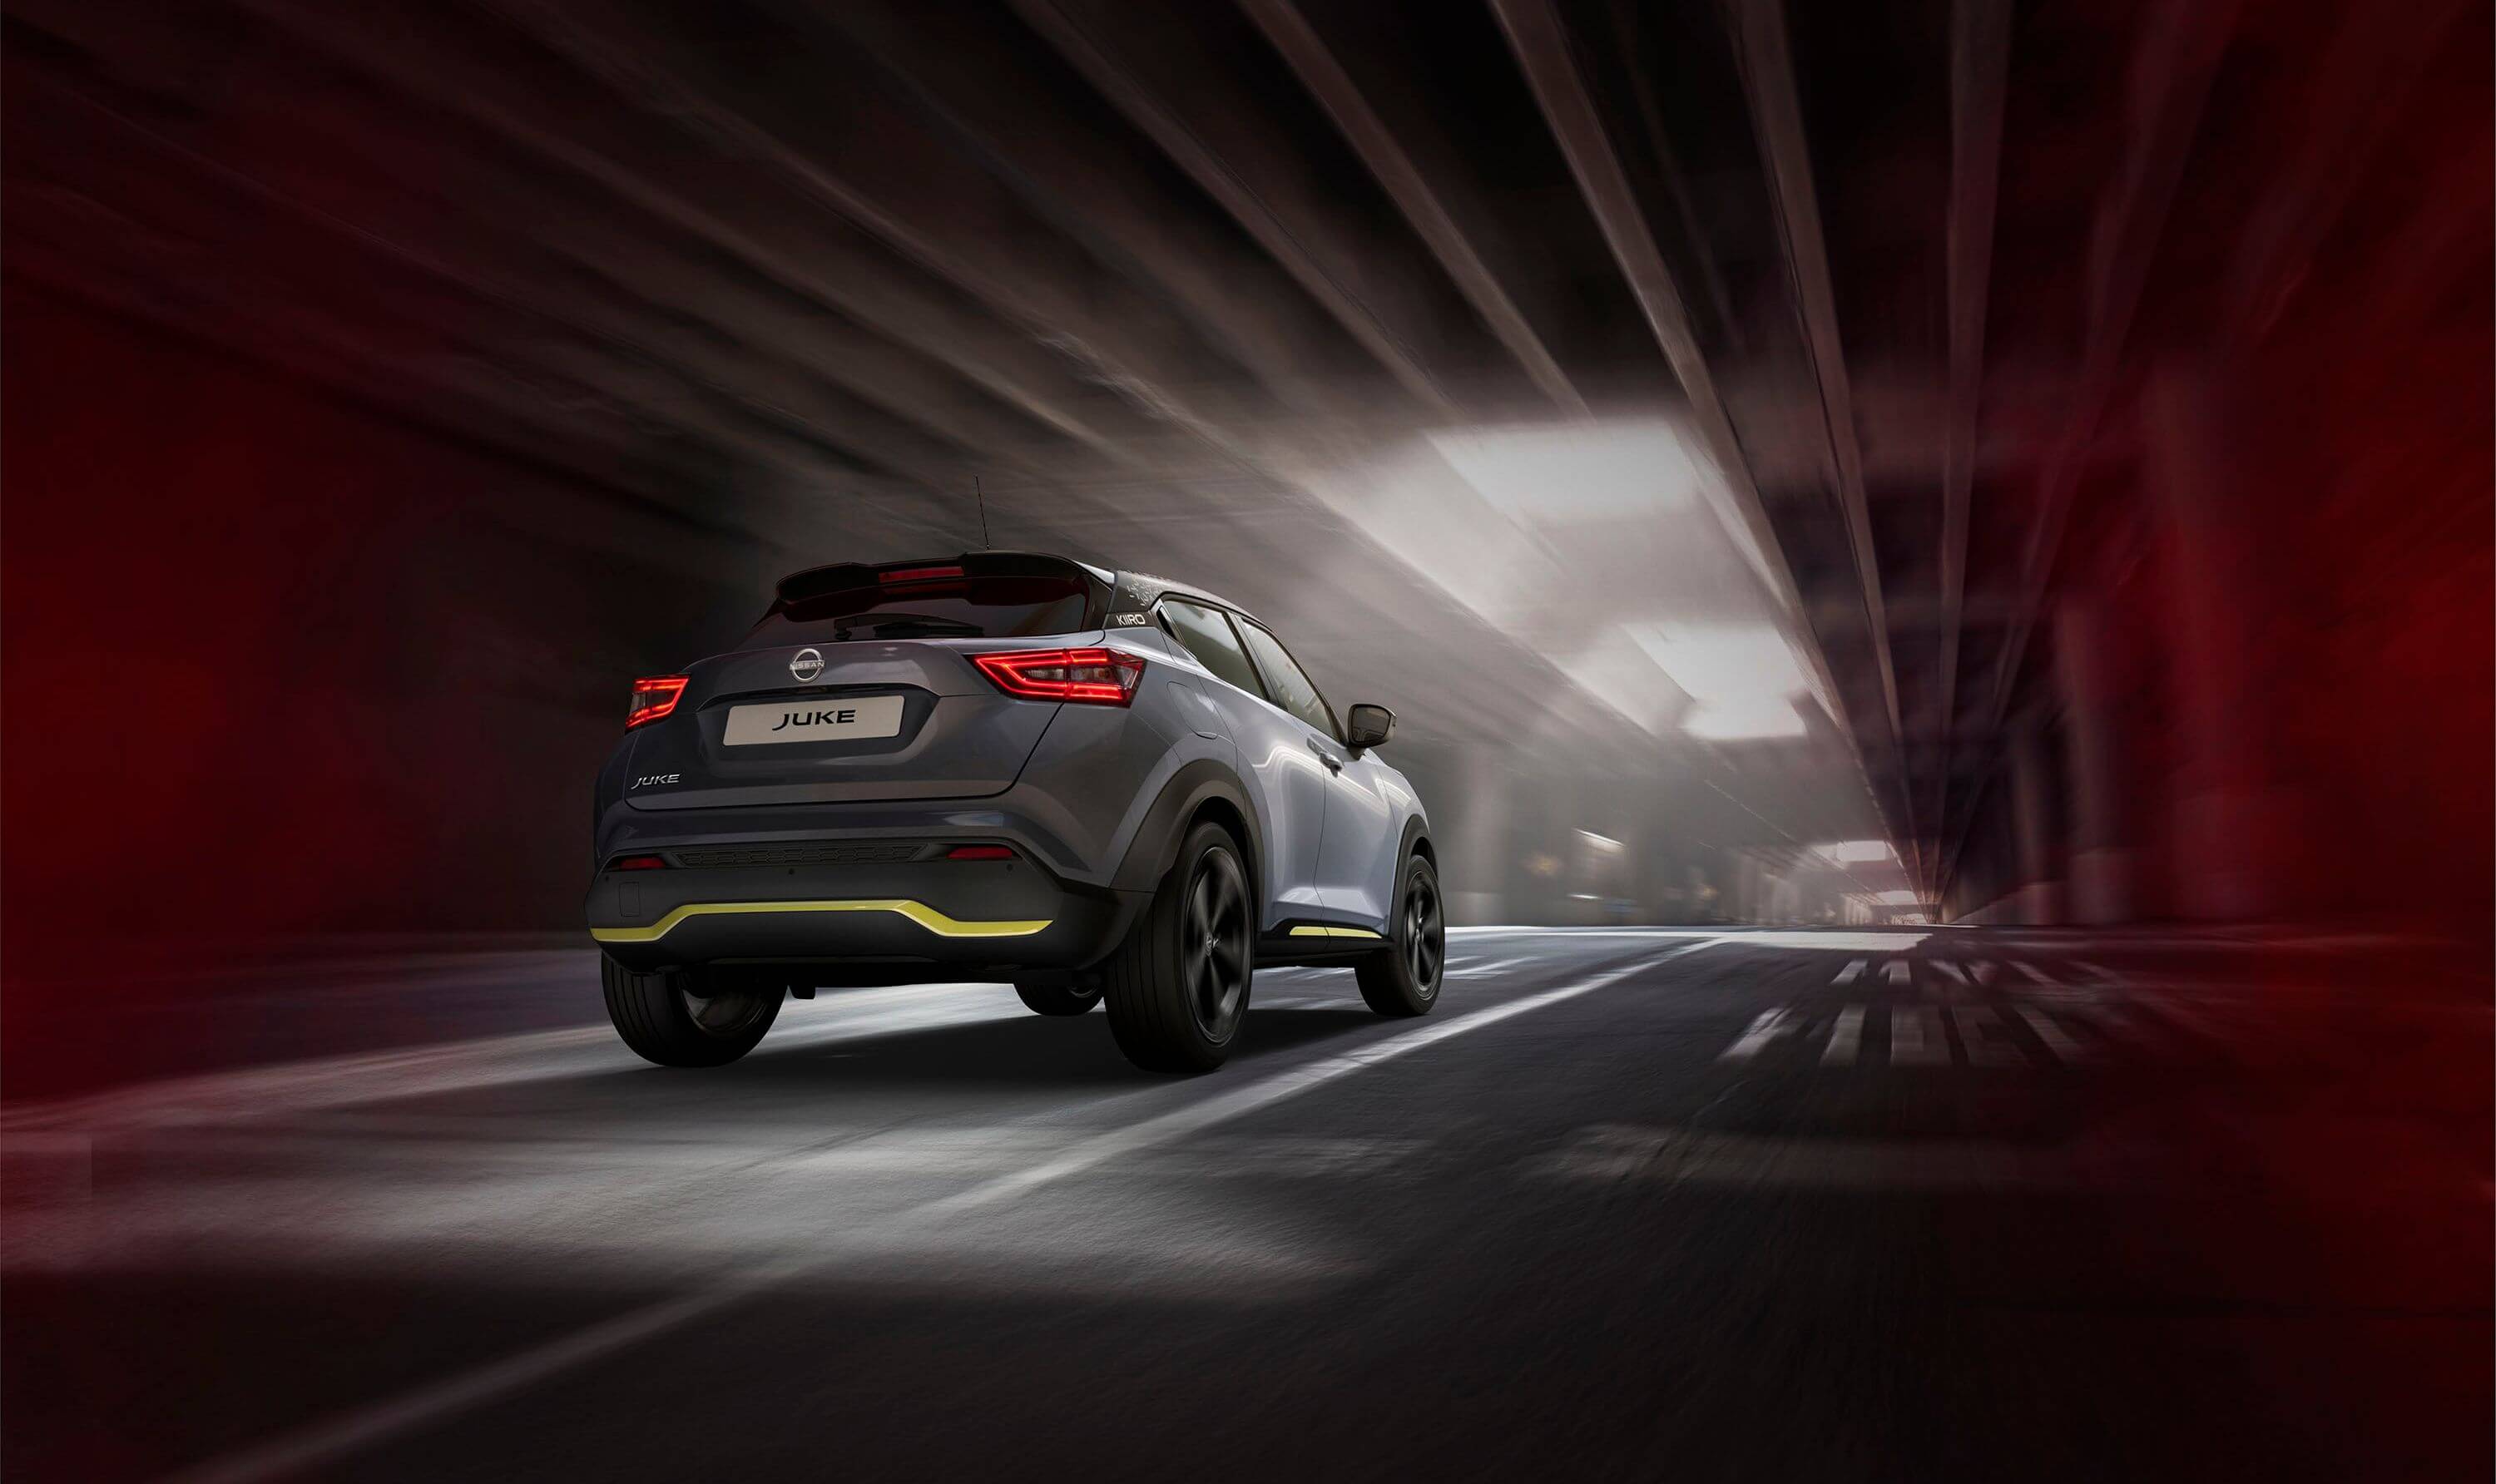 Nissan JUKE Kiiro special version brings eye-catching sophistication to the small crossover segment